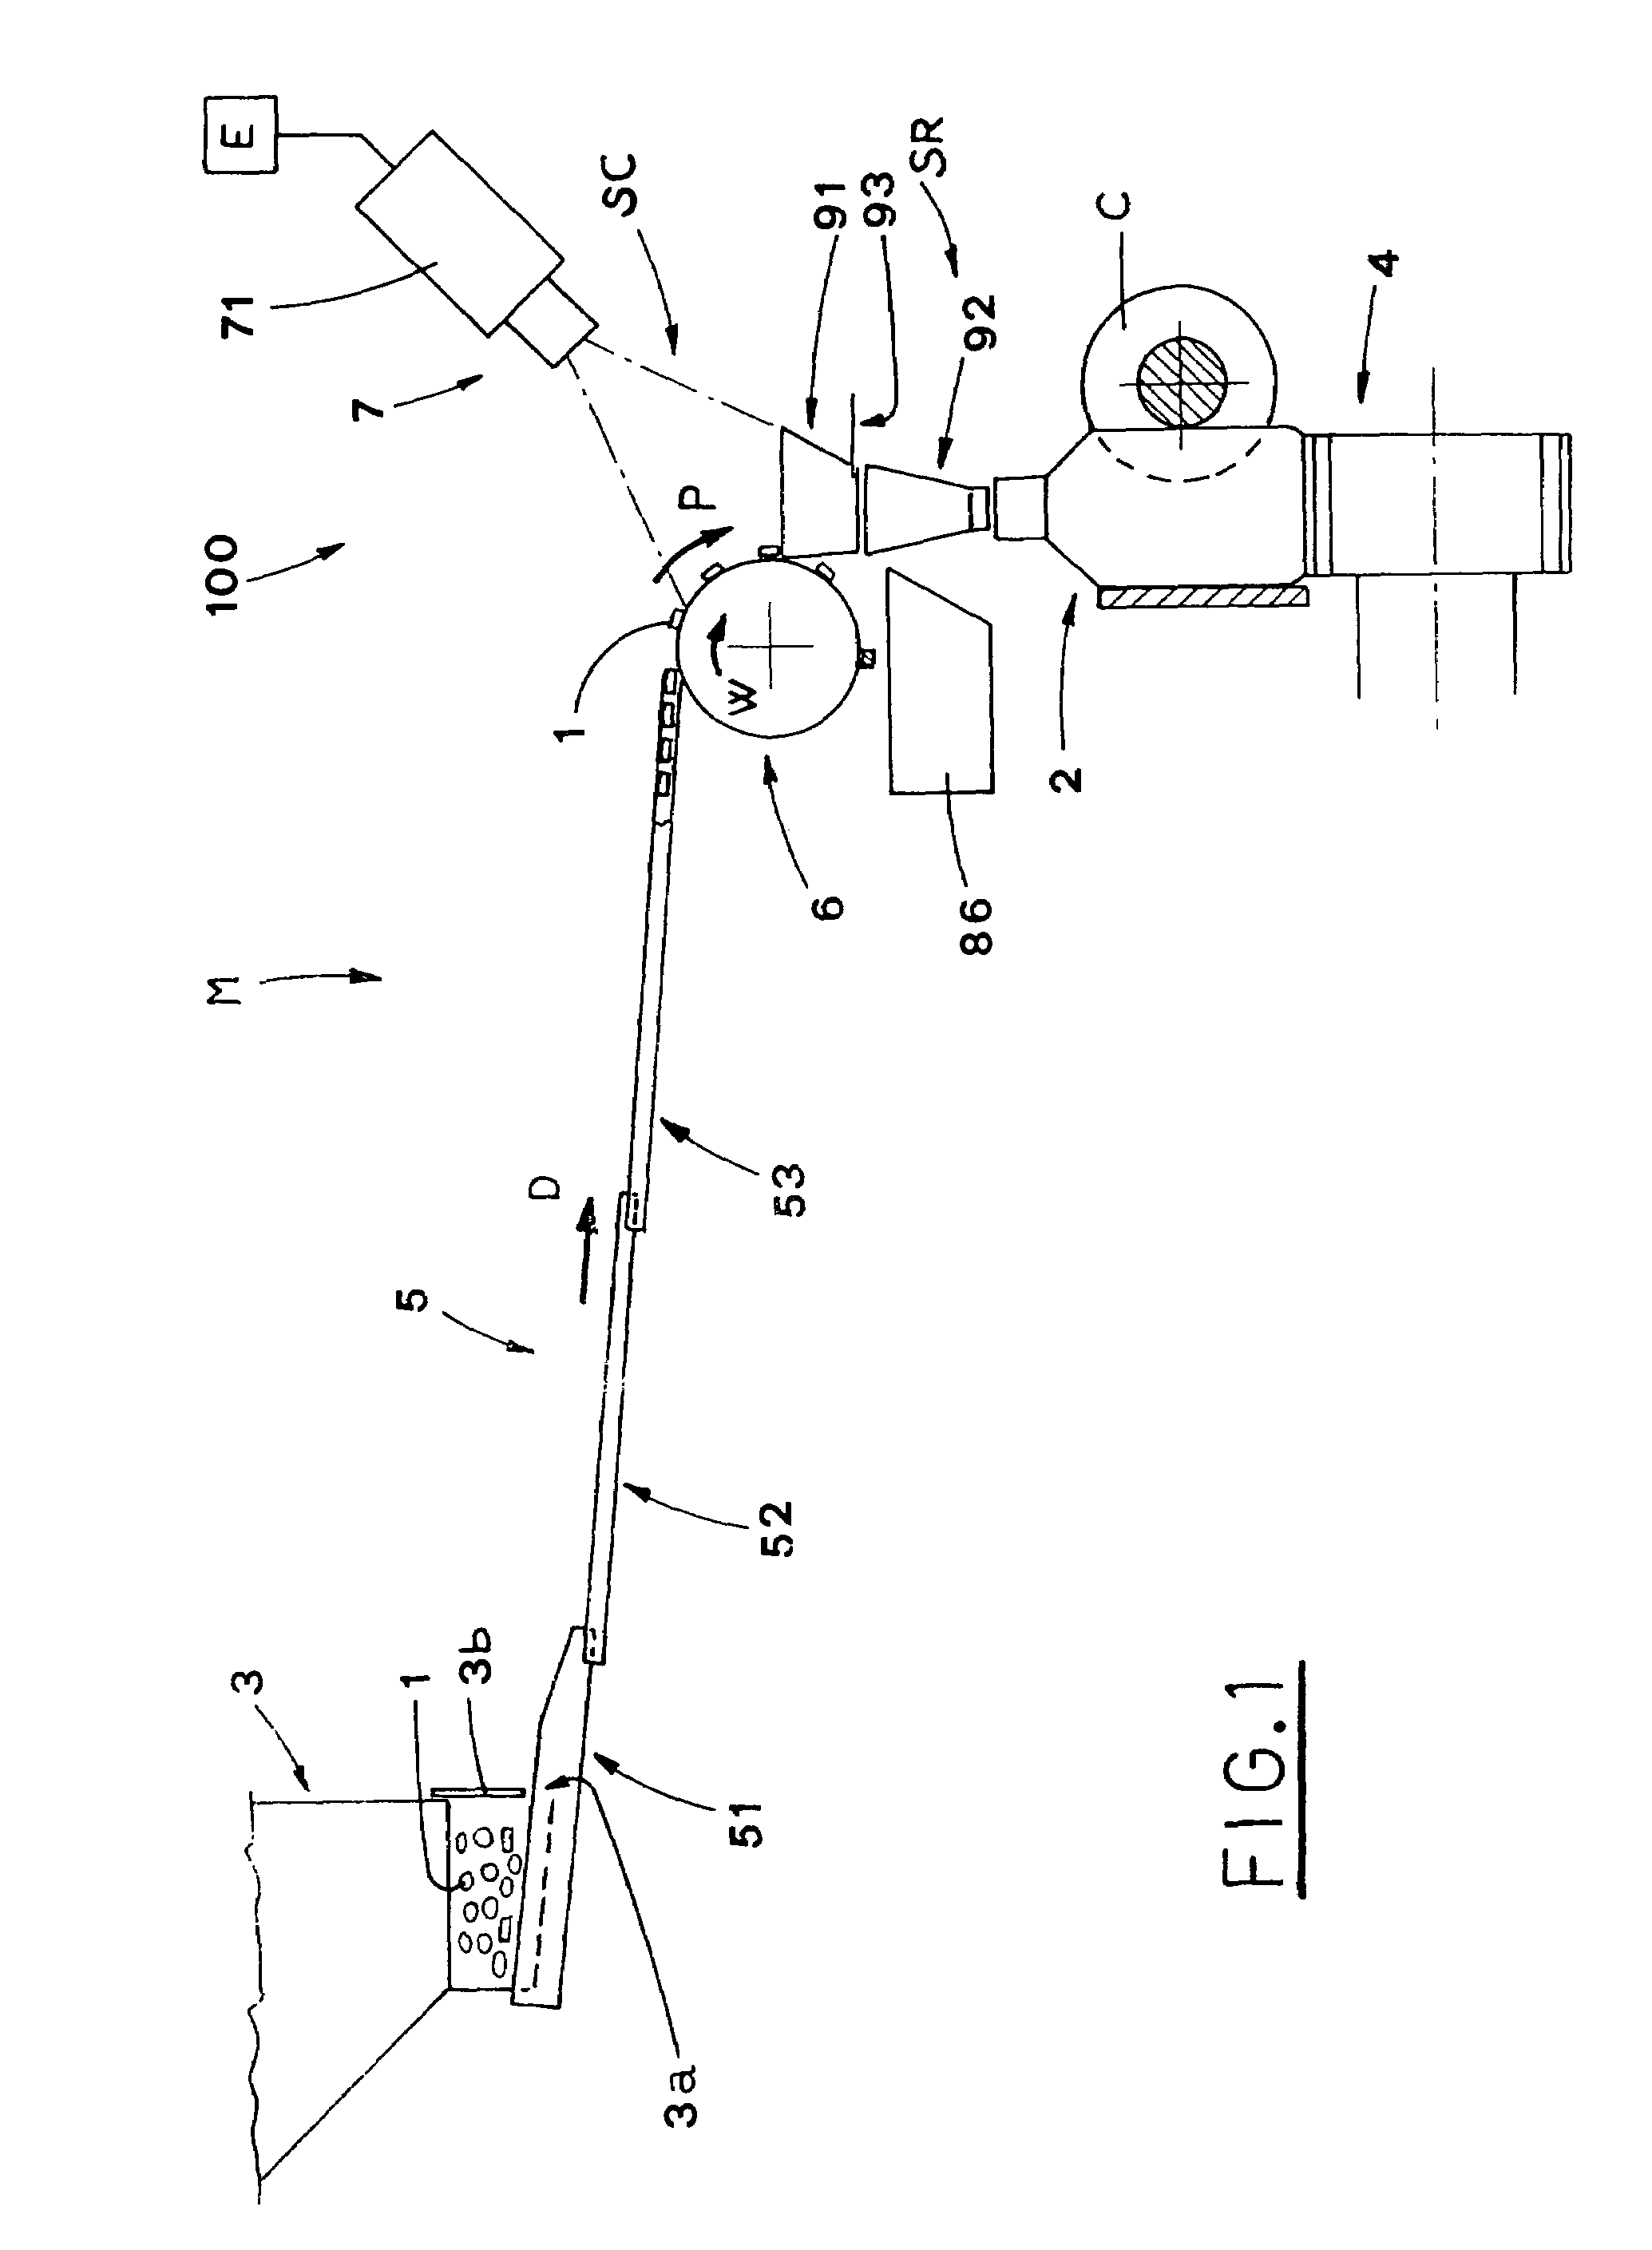 Unit for filling containers with products, in particular, pharmaceutical products